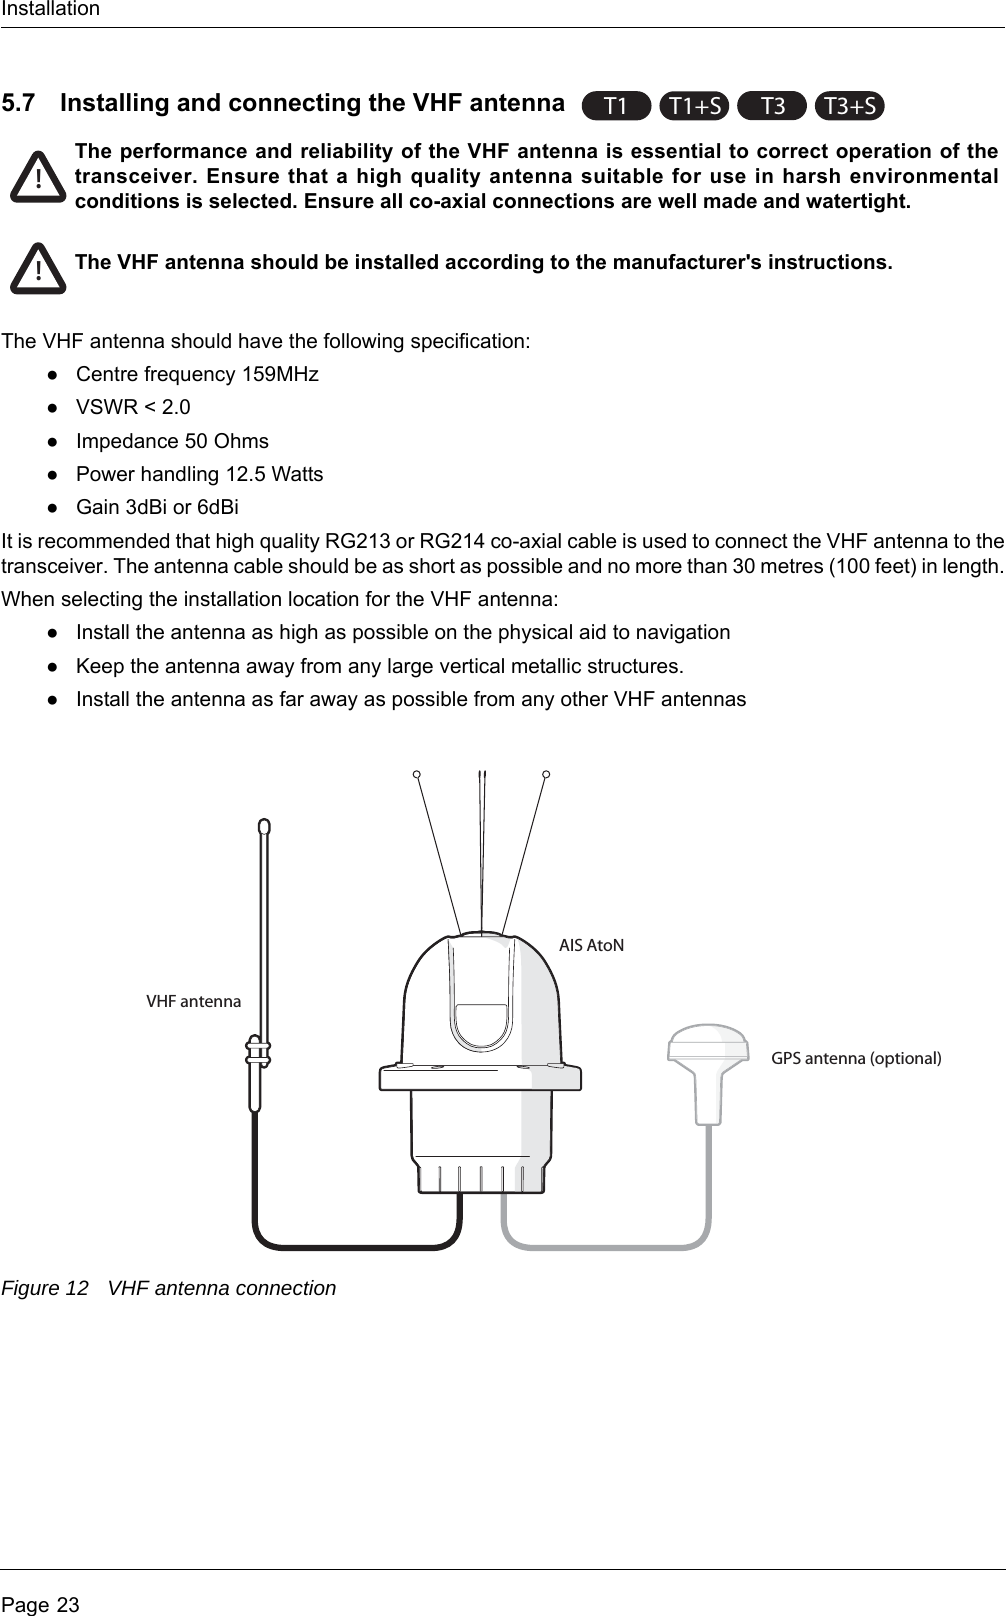 InstallationPage 235.7 Installing and connecting the VHF antenna The VHF antenna should have the following specification:●Centre frequency 159MHz●VSWR &lt; 2.0●Impedance 50 Ohms●Power handling 12.5 Watts●Gain 3dBi or 6dBiIt is recommended that high quality RG213 or RG214 co-axial cable is used to connect the VHF antenna to the transceiver. The antenna cable should be as short as possible and no more than 30 metres (100 feet) in length.When selecting the installation location for the VHF antenna:●Install the antenna as high as possible on the physical aid to navigation●Keep the antenna away from any large vertical metallic structures.●Install the antenna as far away as possible from any other VHF antennasFigure 12 VHF antenna connectionT1 T1+ST3T3+S!The performance and reliability of the VHF antenna is essential to correct operation of the transceiver. Ensure that a high quality antenna suitable for use in harsh environmental conditions is selected. Ensure all co-axial connections are well made and watertight.!The VHF antenna should be installed according to the manufacturer&apos;s instructions.VHF antennaGPS antenna (optional)AIS AtoN